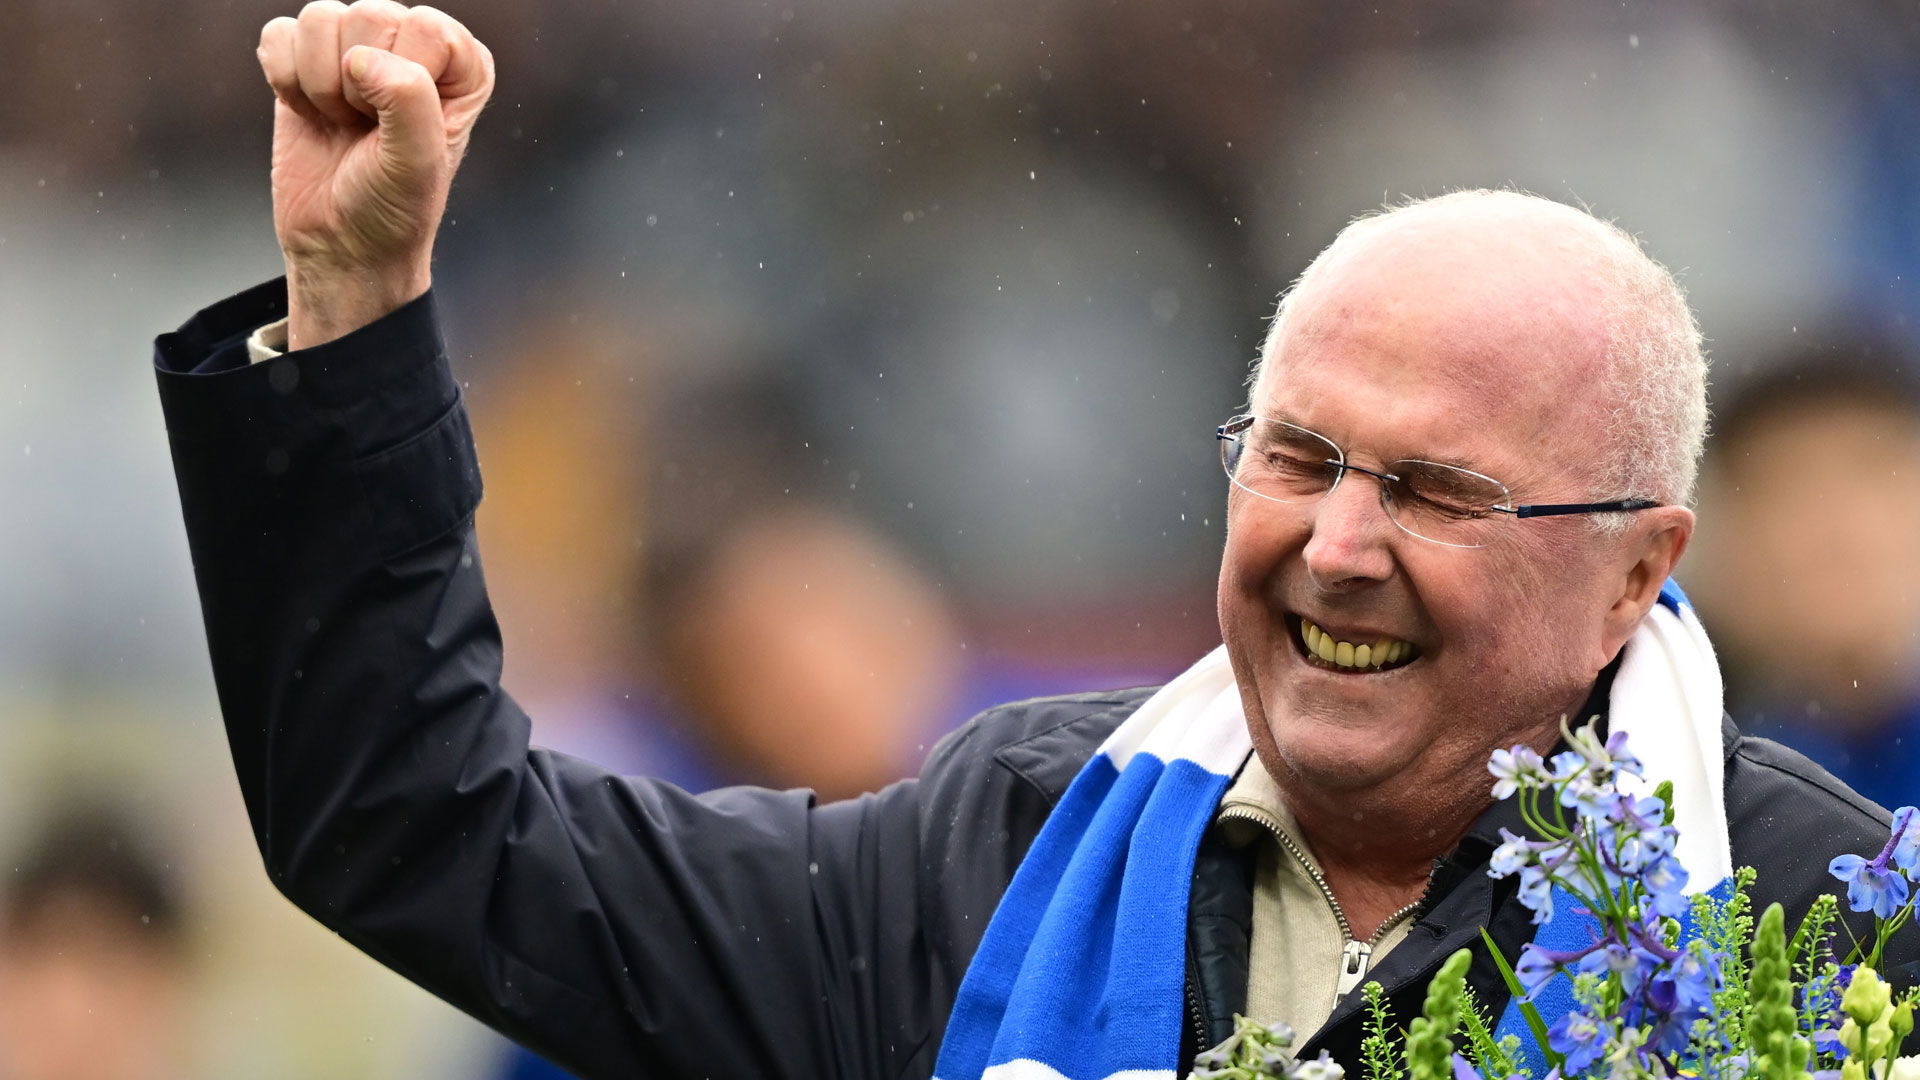 Sven-Goran Eriksson close to tears as he’s given incredibly emotional tribute by former club amid cancer battle [Video]